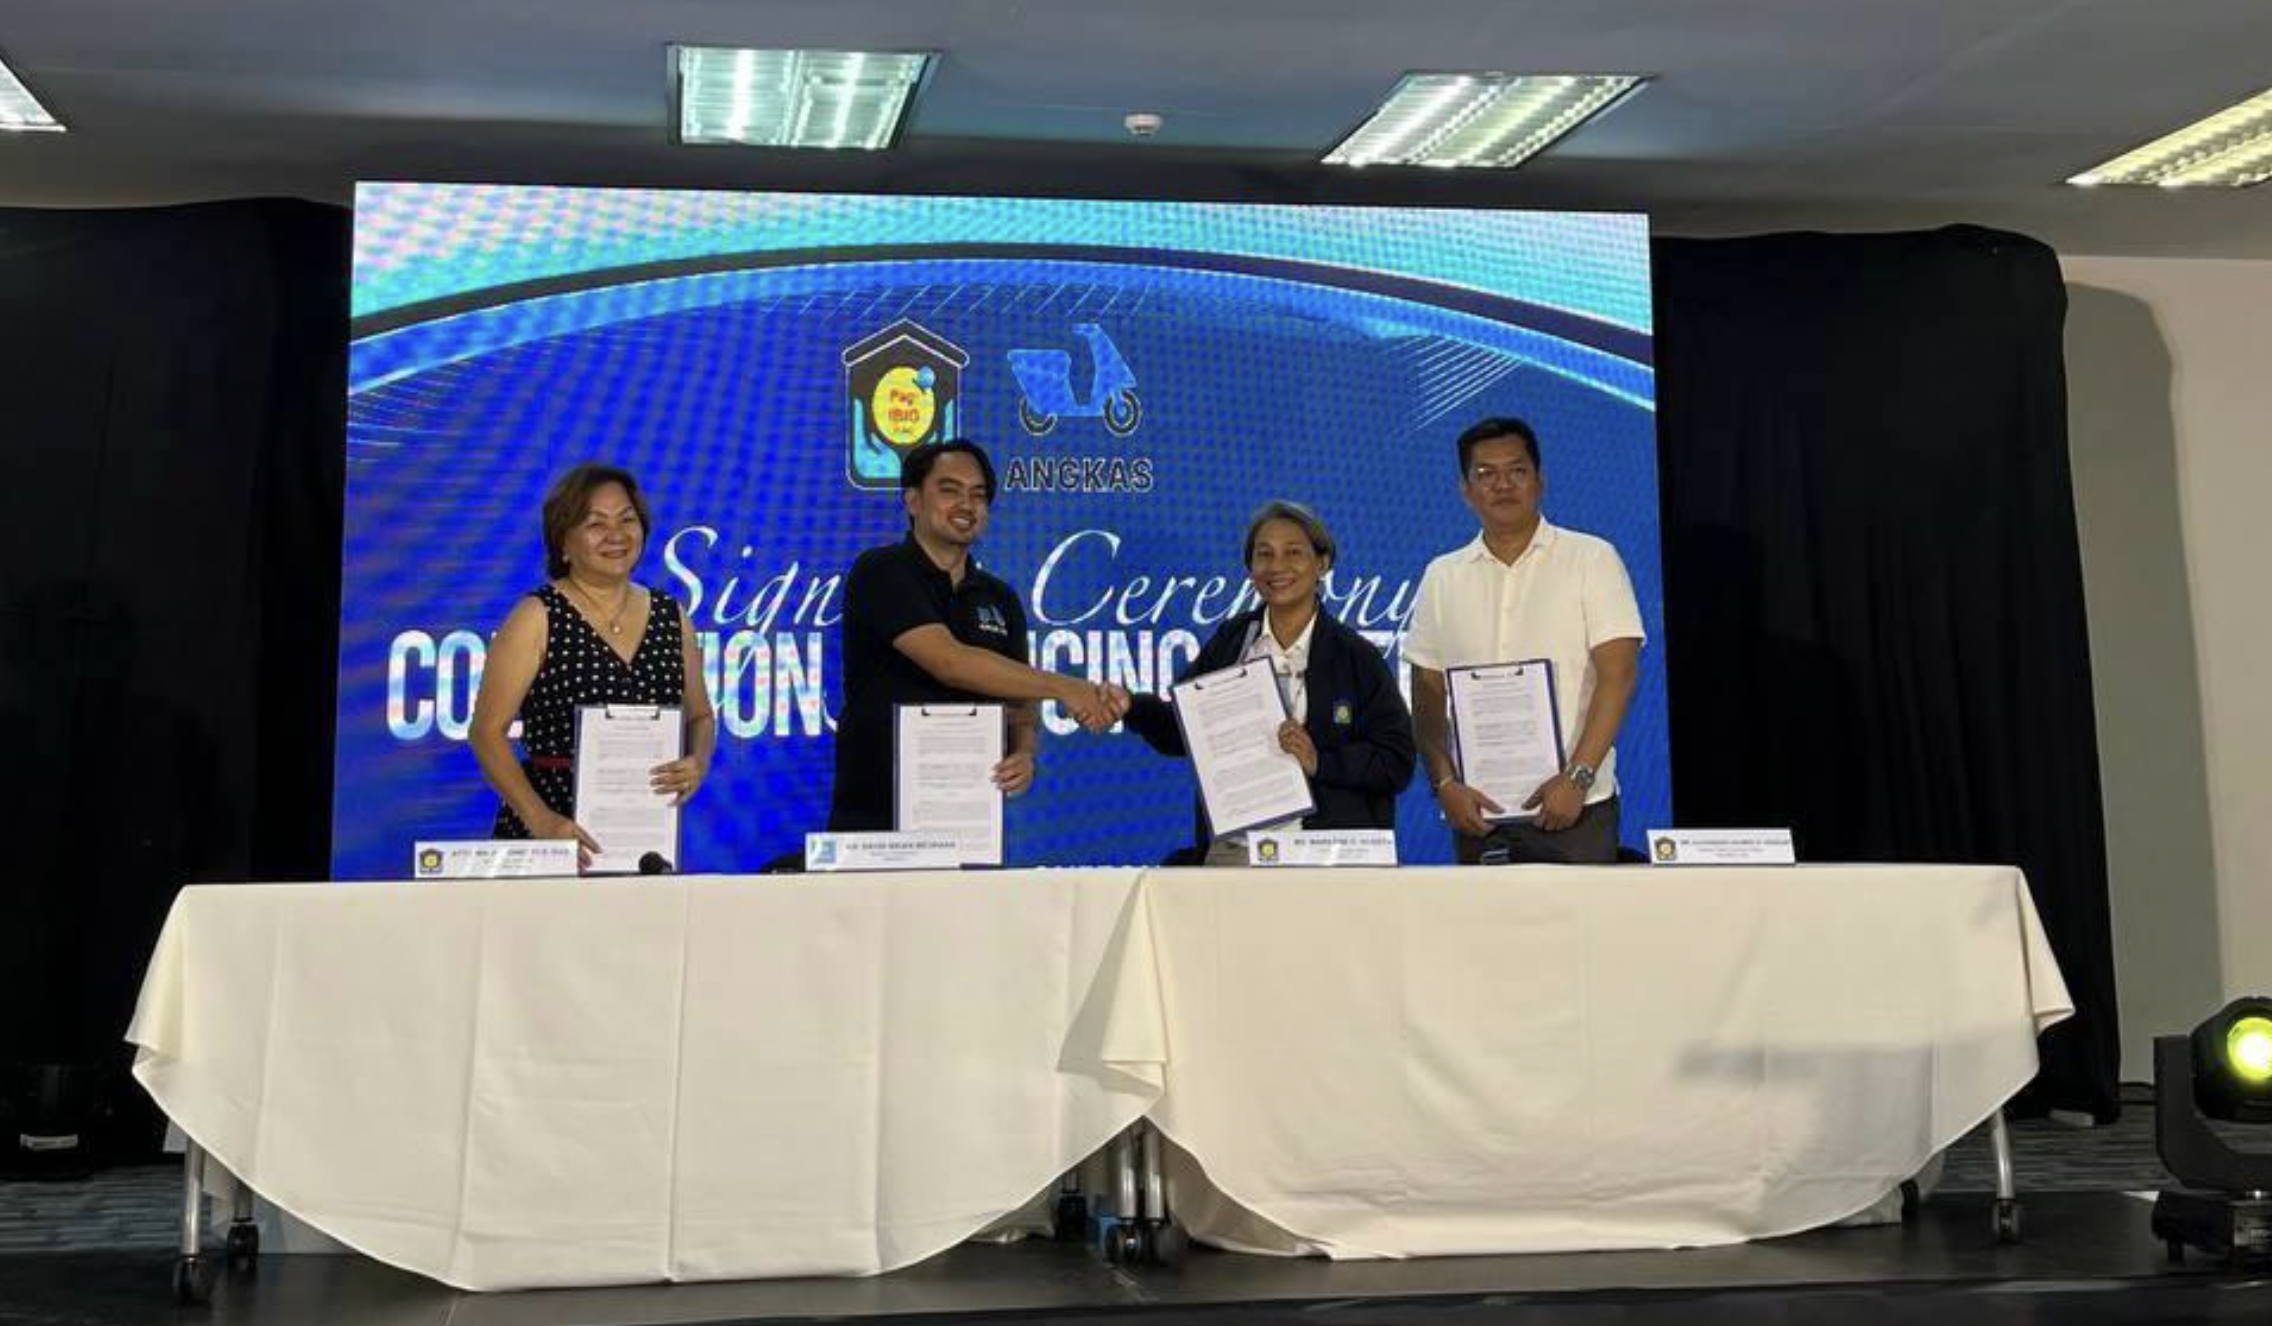 Angkas, Pag-IBIG seek to empower riders through Voluntary Contribution Collection